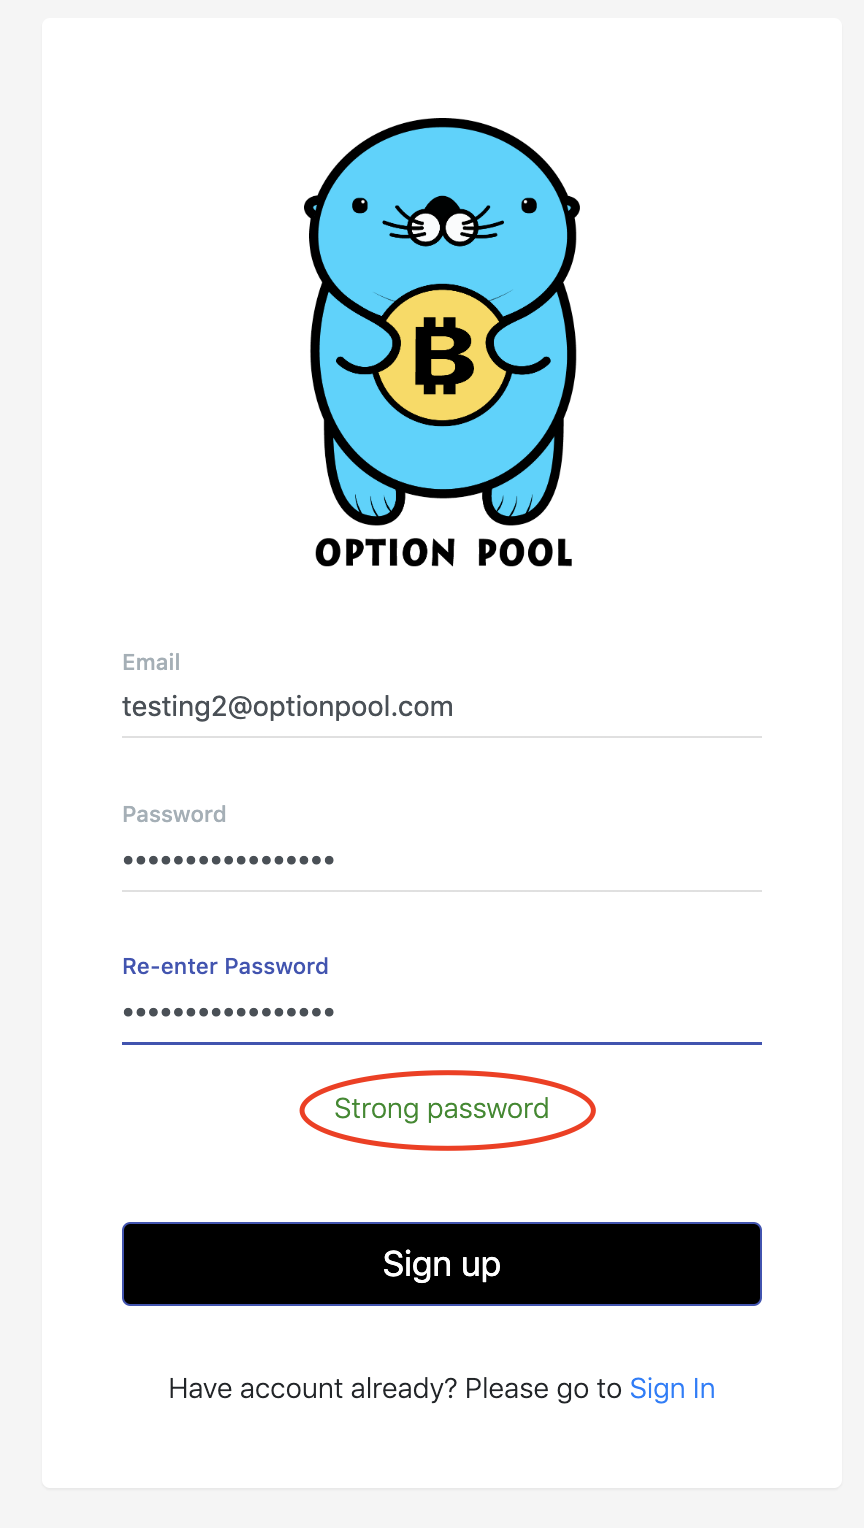 account creation form at Option Pool, with password security highlighted in a red circle